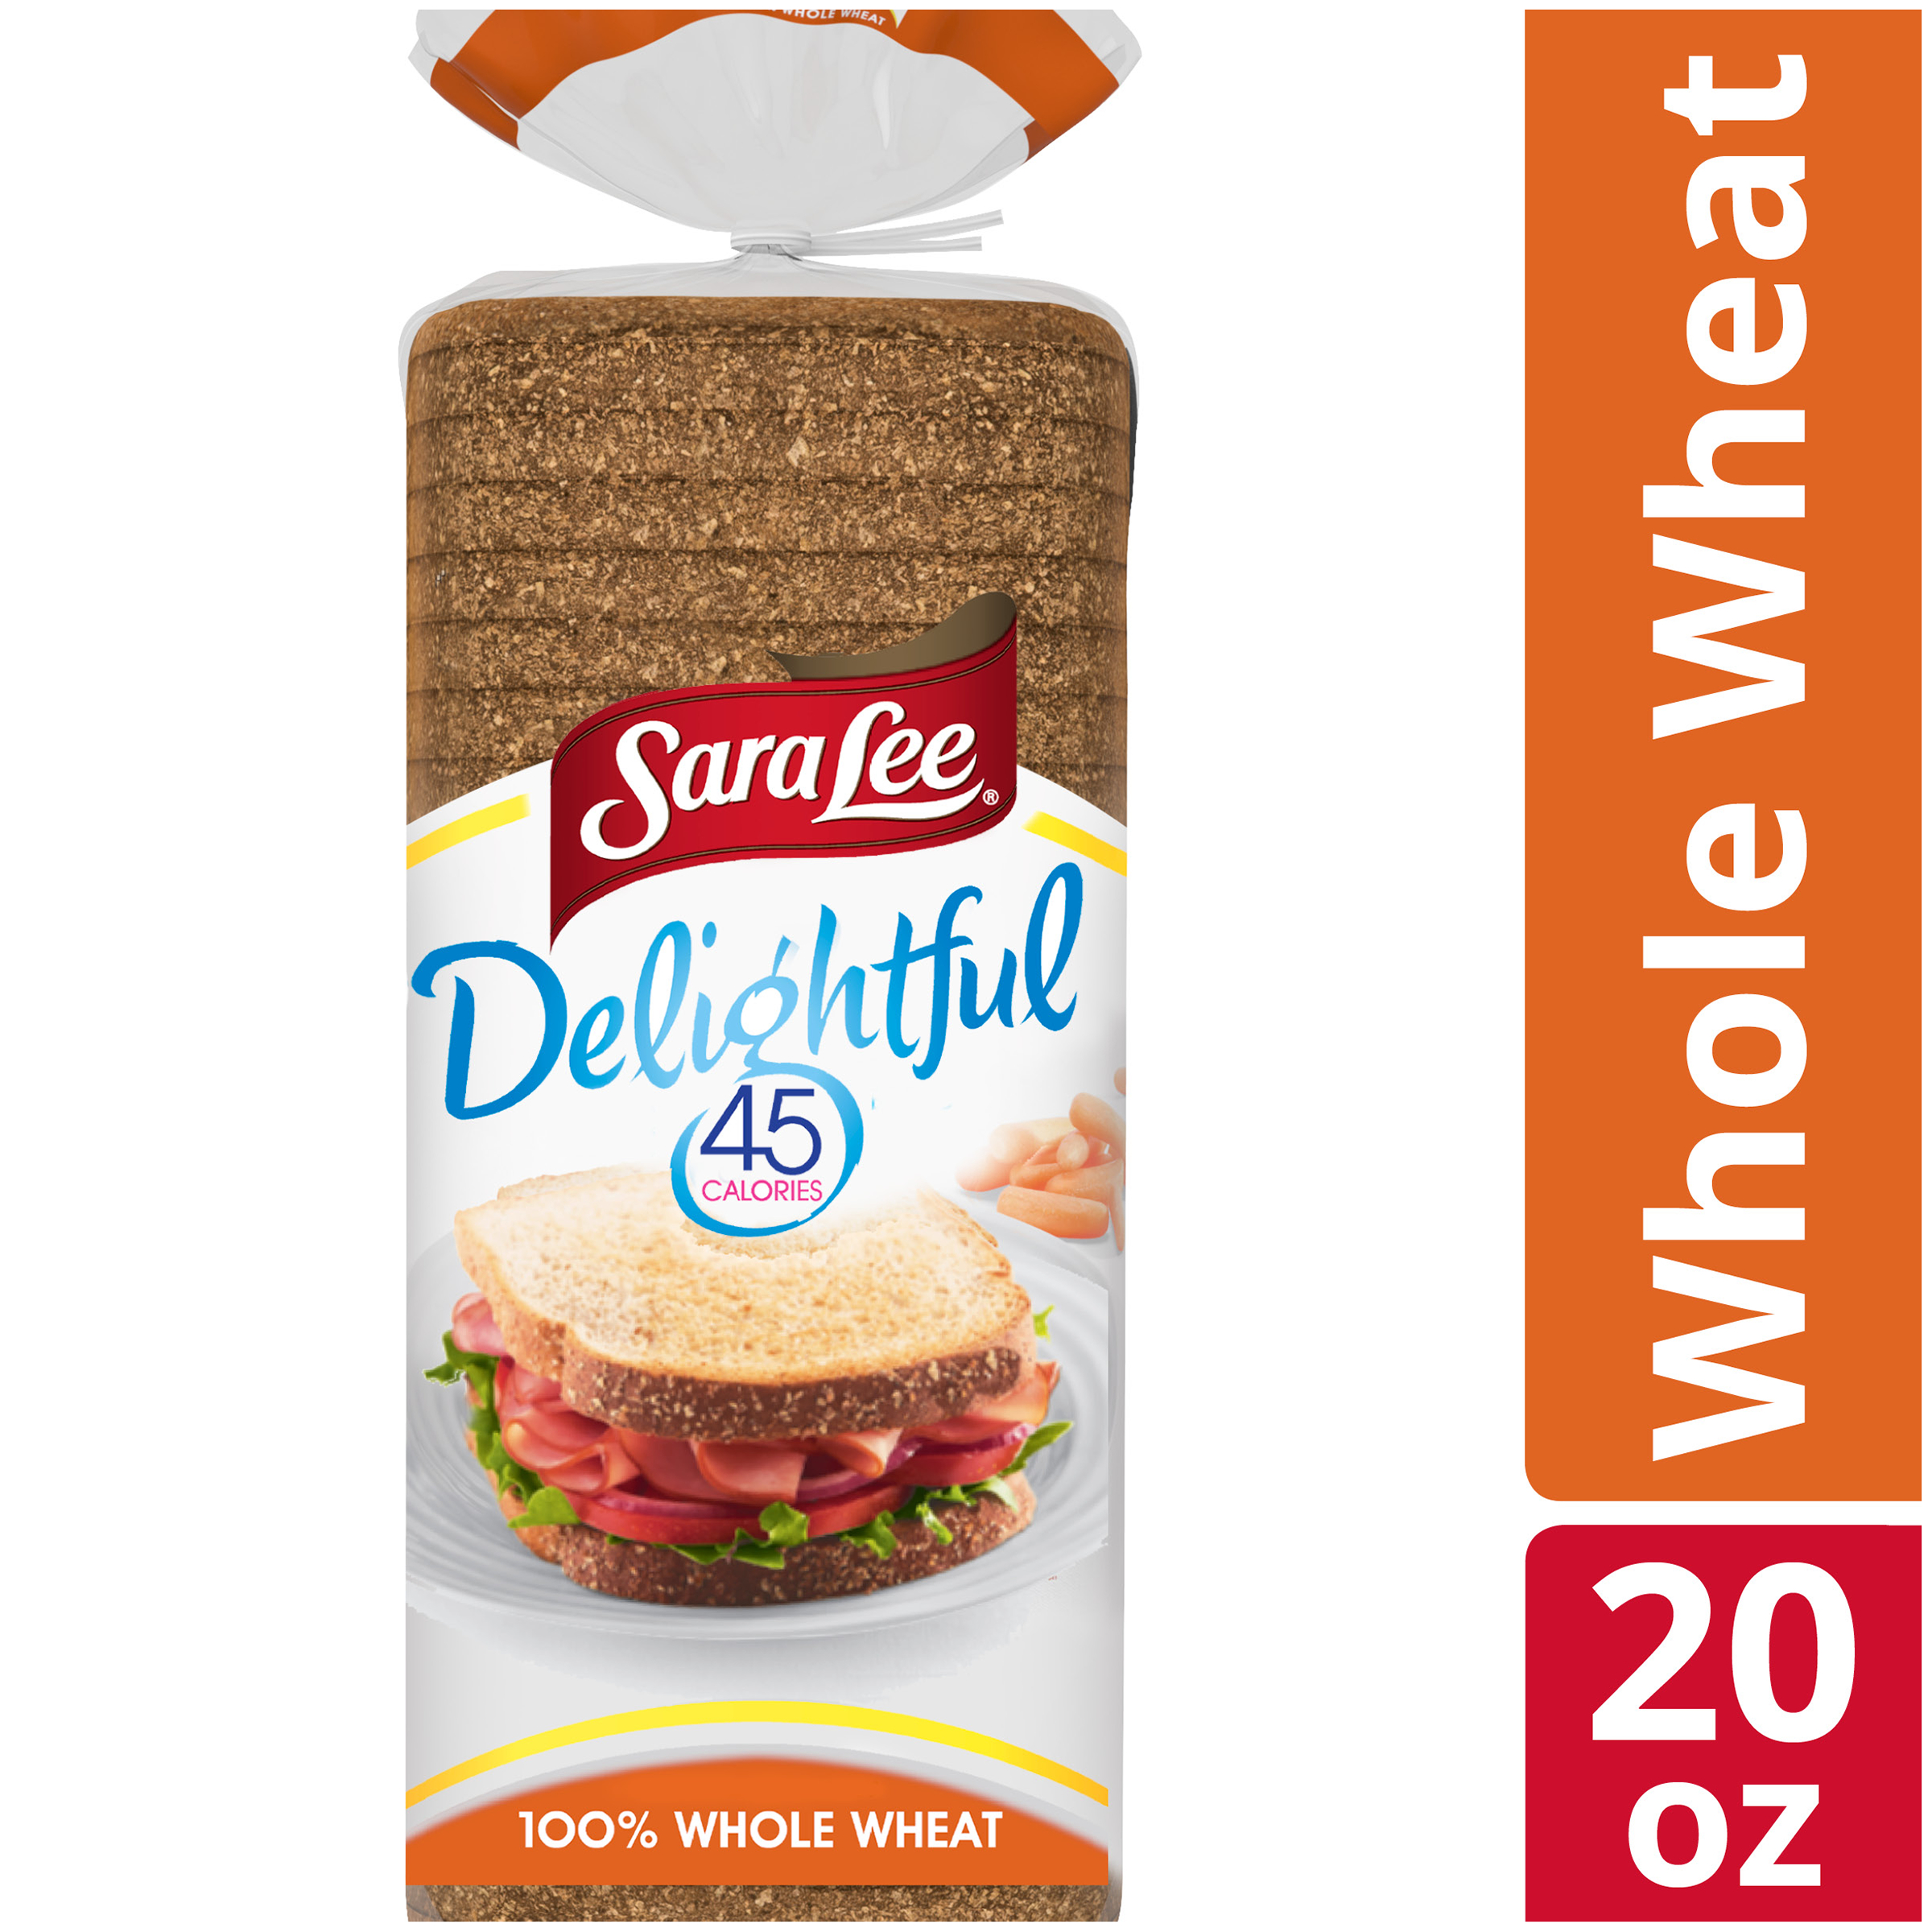 Sara Lee Delightful Honey Whole Wheat Bread, 45 Calories per Slice, 1 Pound  4 Ounce Loaf – CrowdedLine Delivery